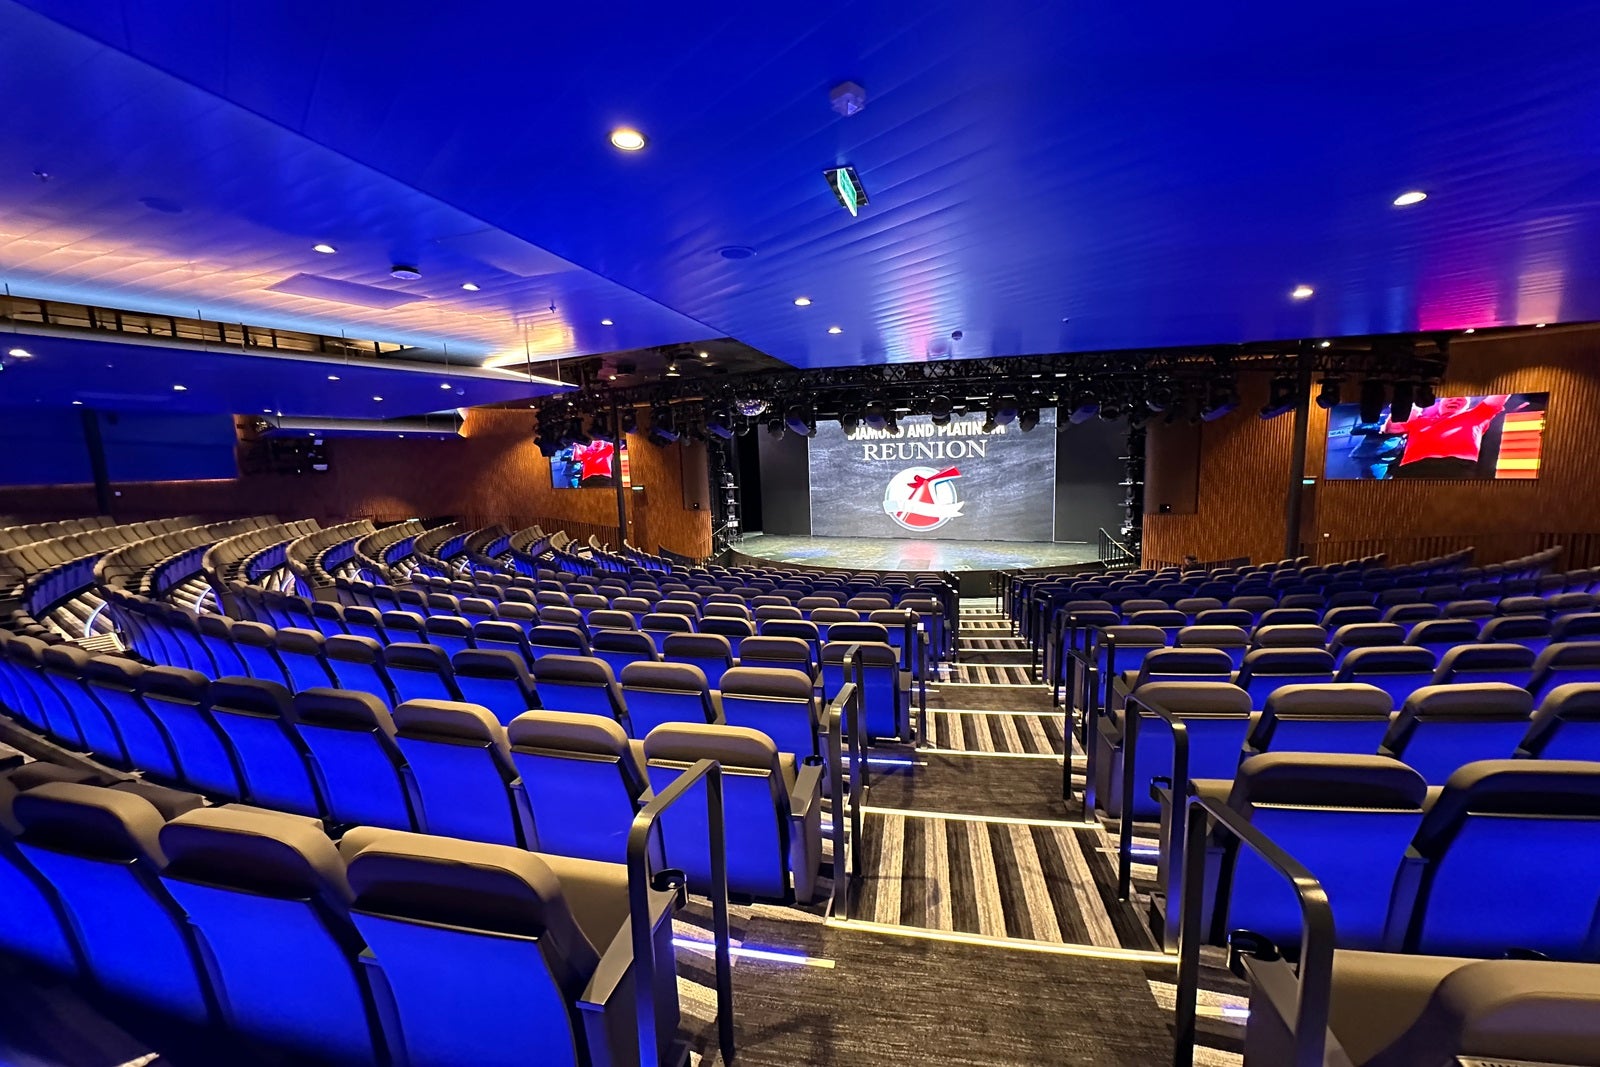 A view of a cruise ship theater from the back with the stage in front and seating all around